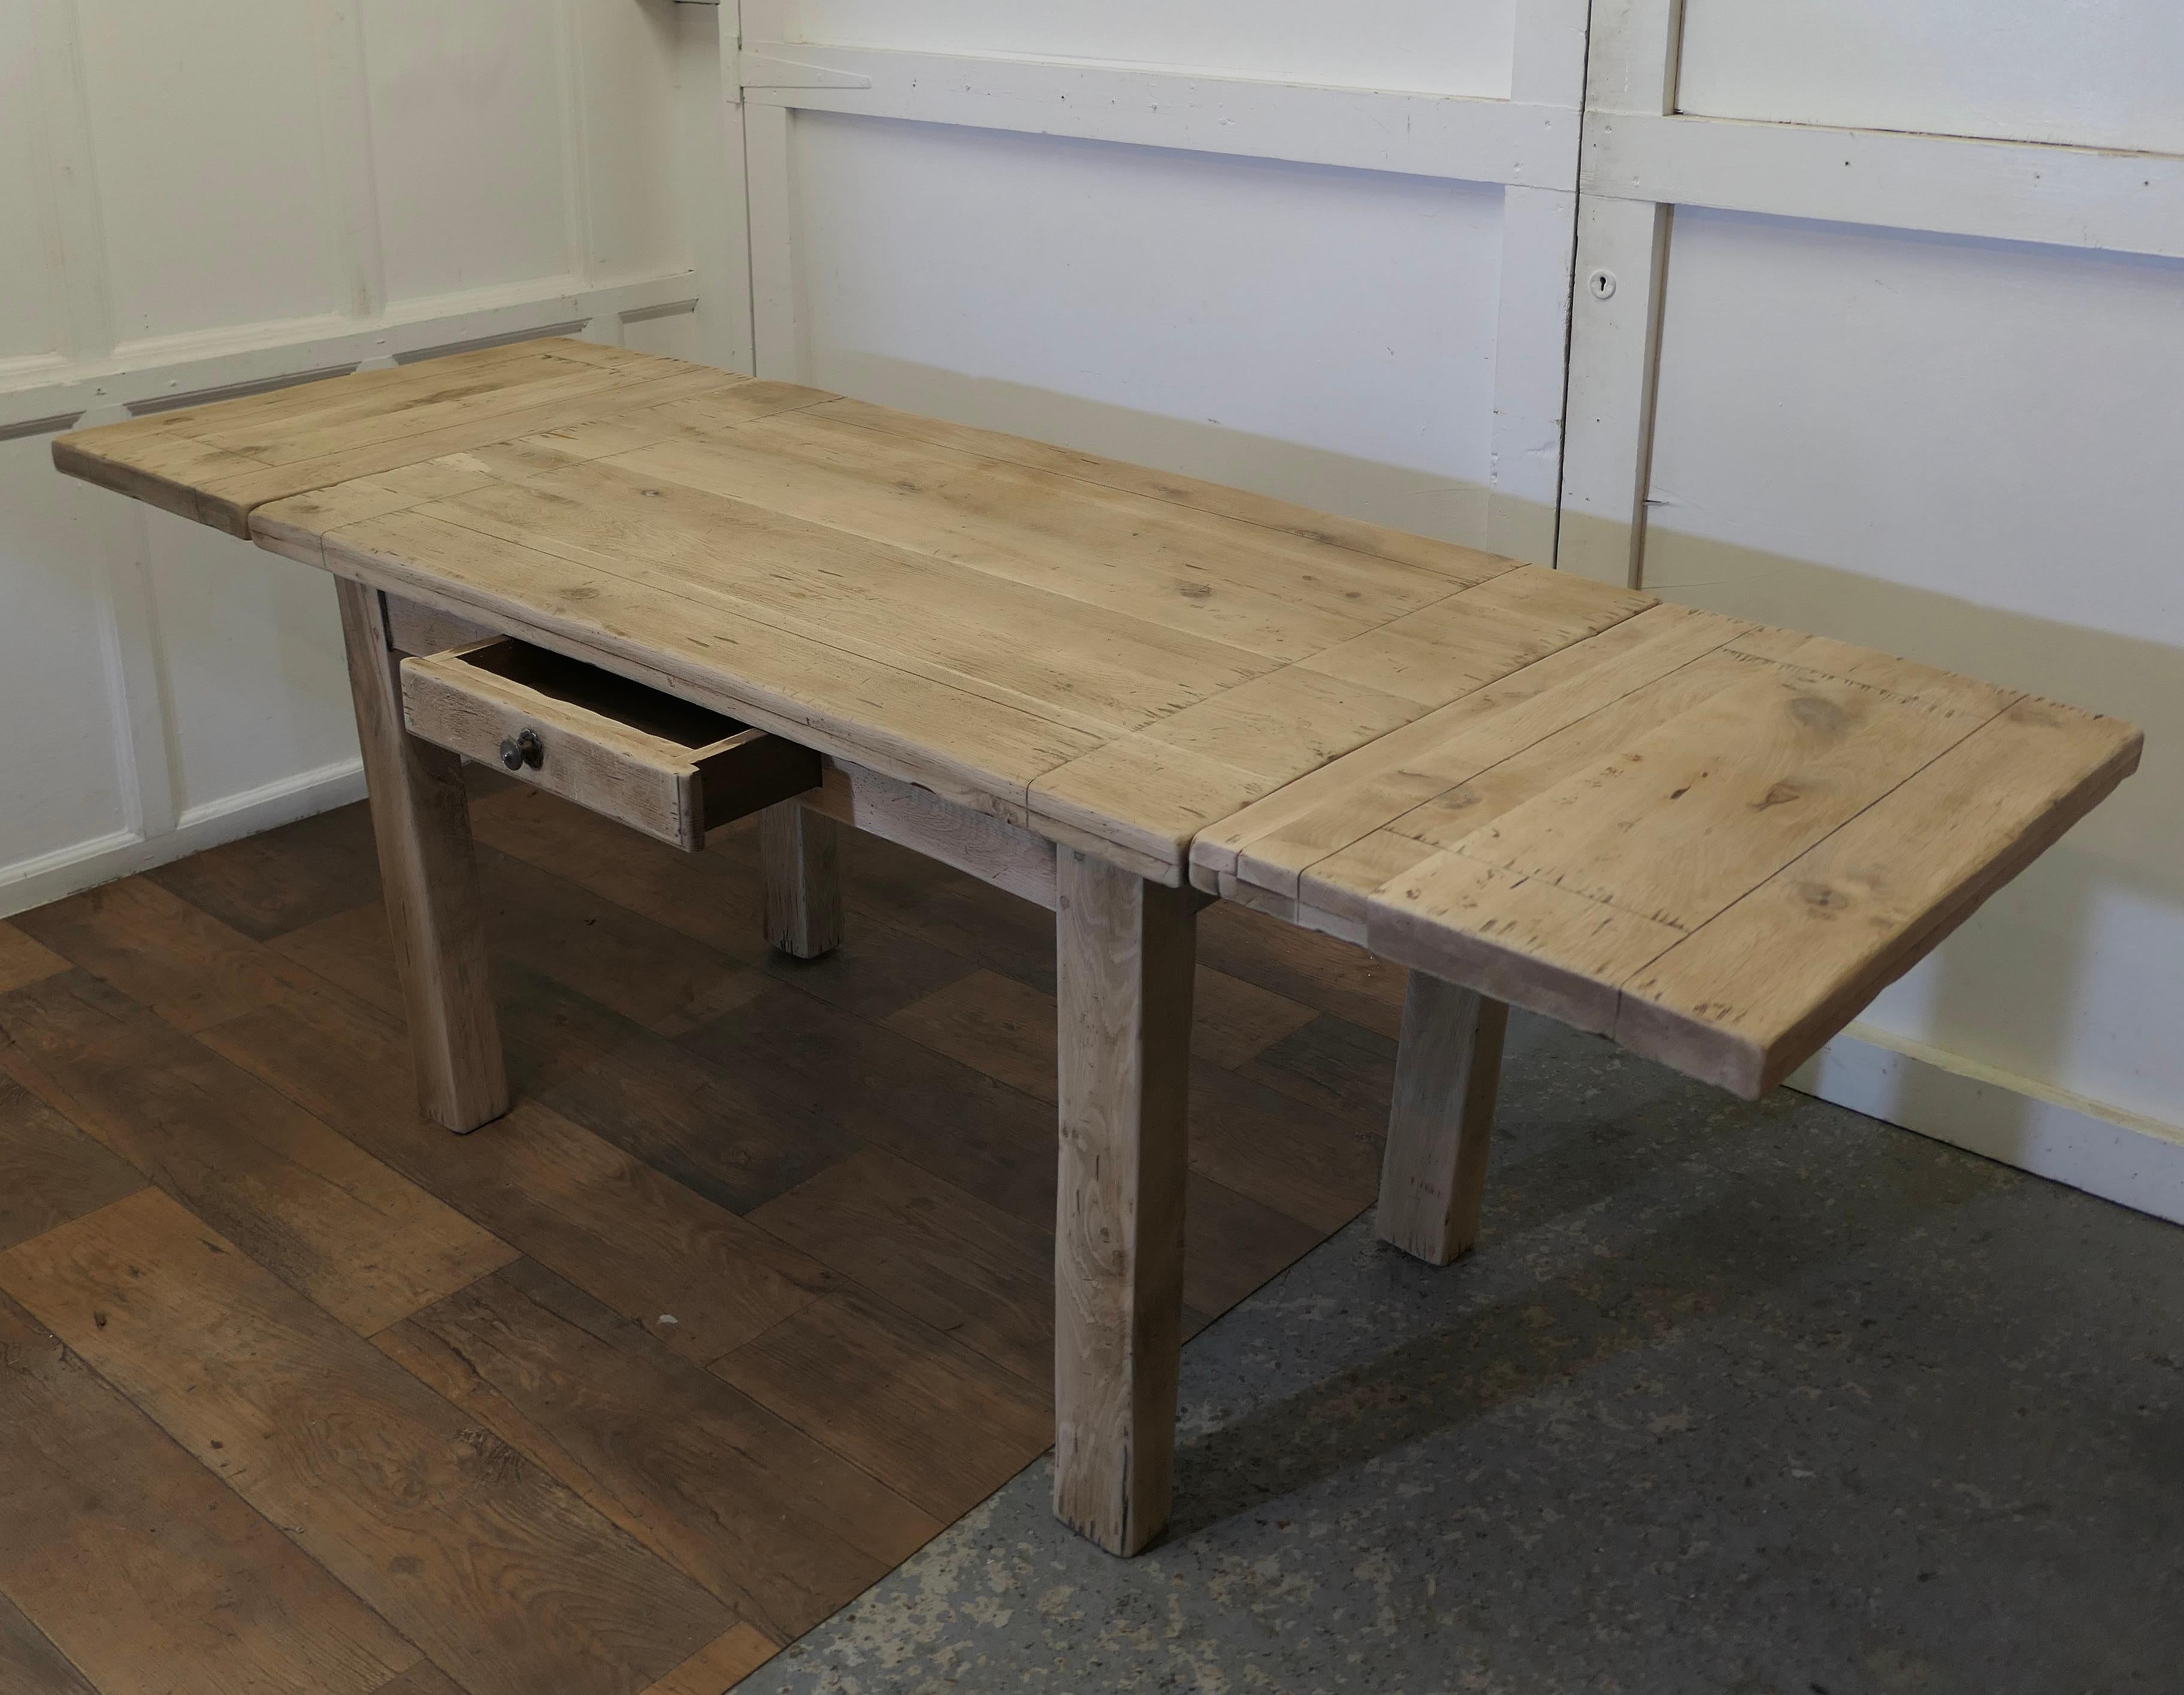 Sun Bleached Oak 7ft Extending Dining Table  The table is very heavy an solid  In Good Condition For Sale In Chillerton, Isle of Wight